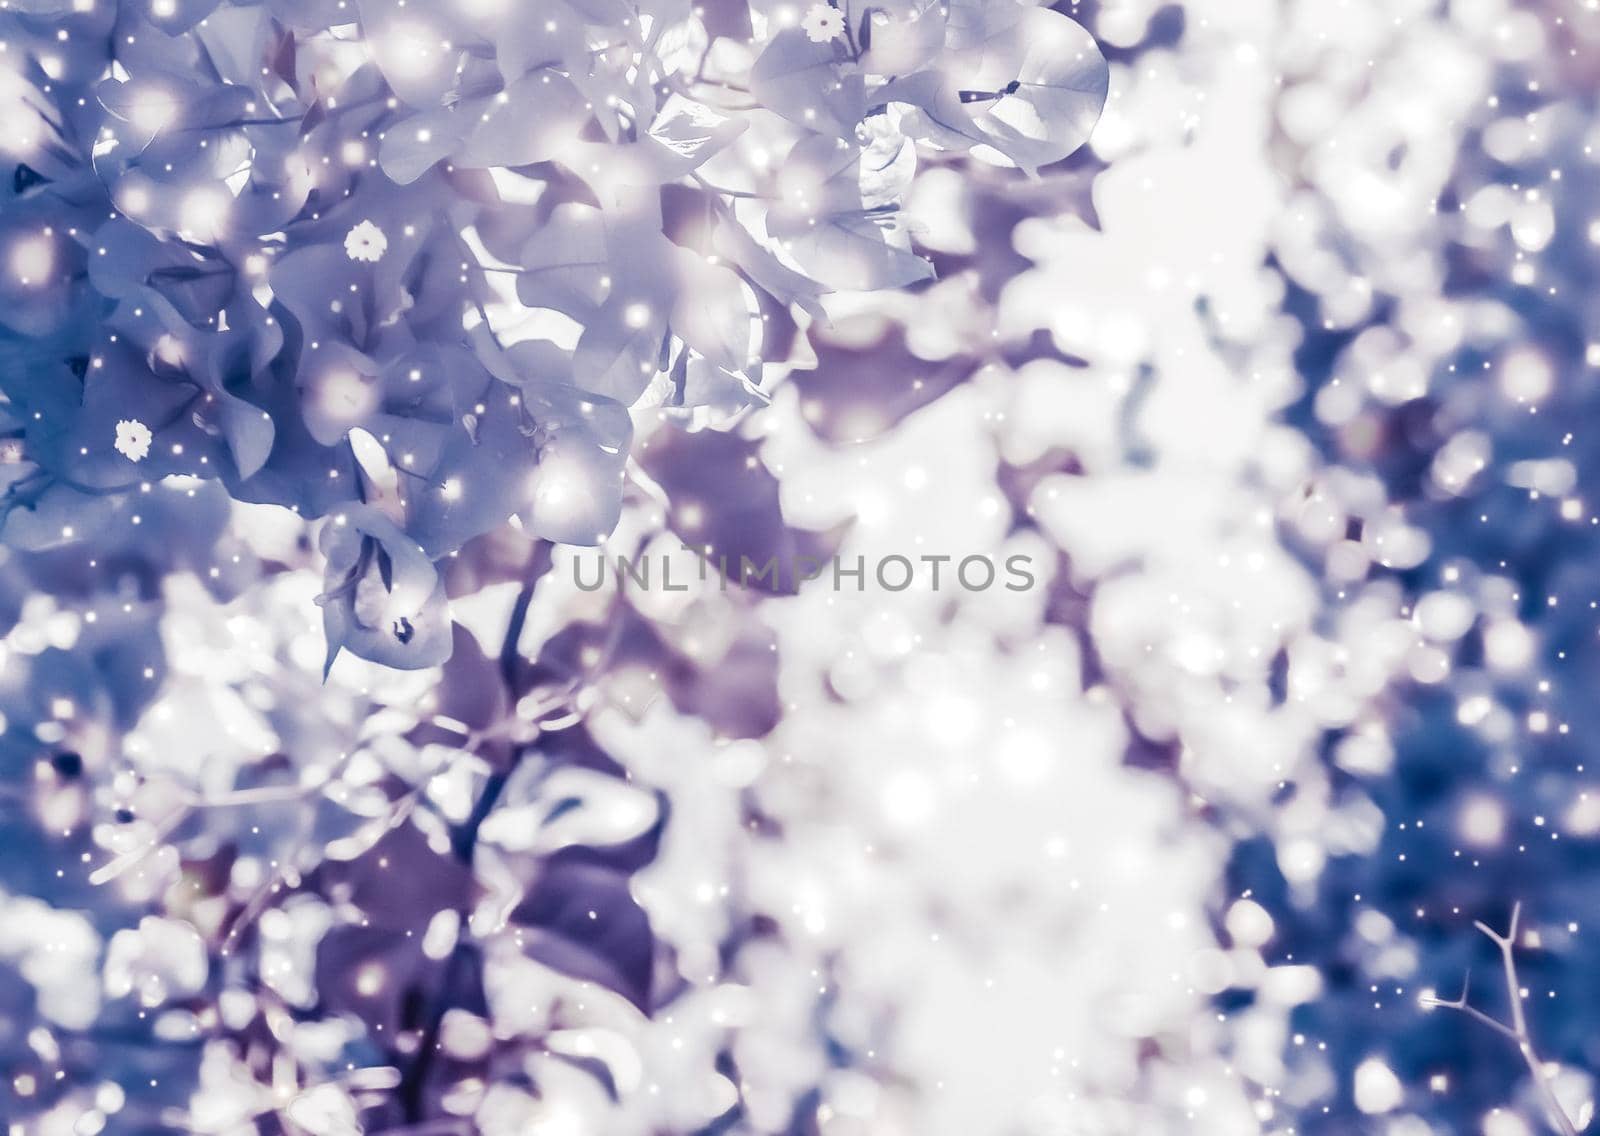 Magical, branding and festive concept - Christmas, New Years purple floral nature background, holiday card design, flower tree and snow glitter as winter season sale backdrop for luxury beauty brand